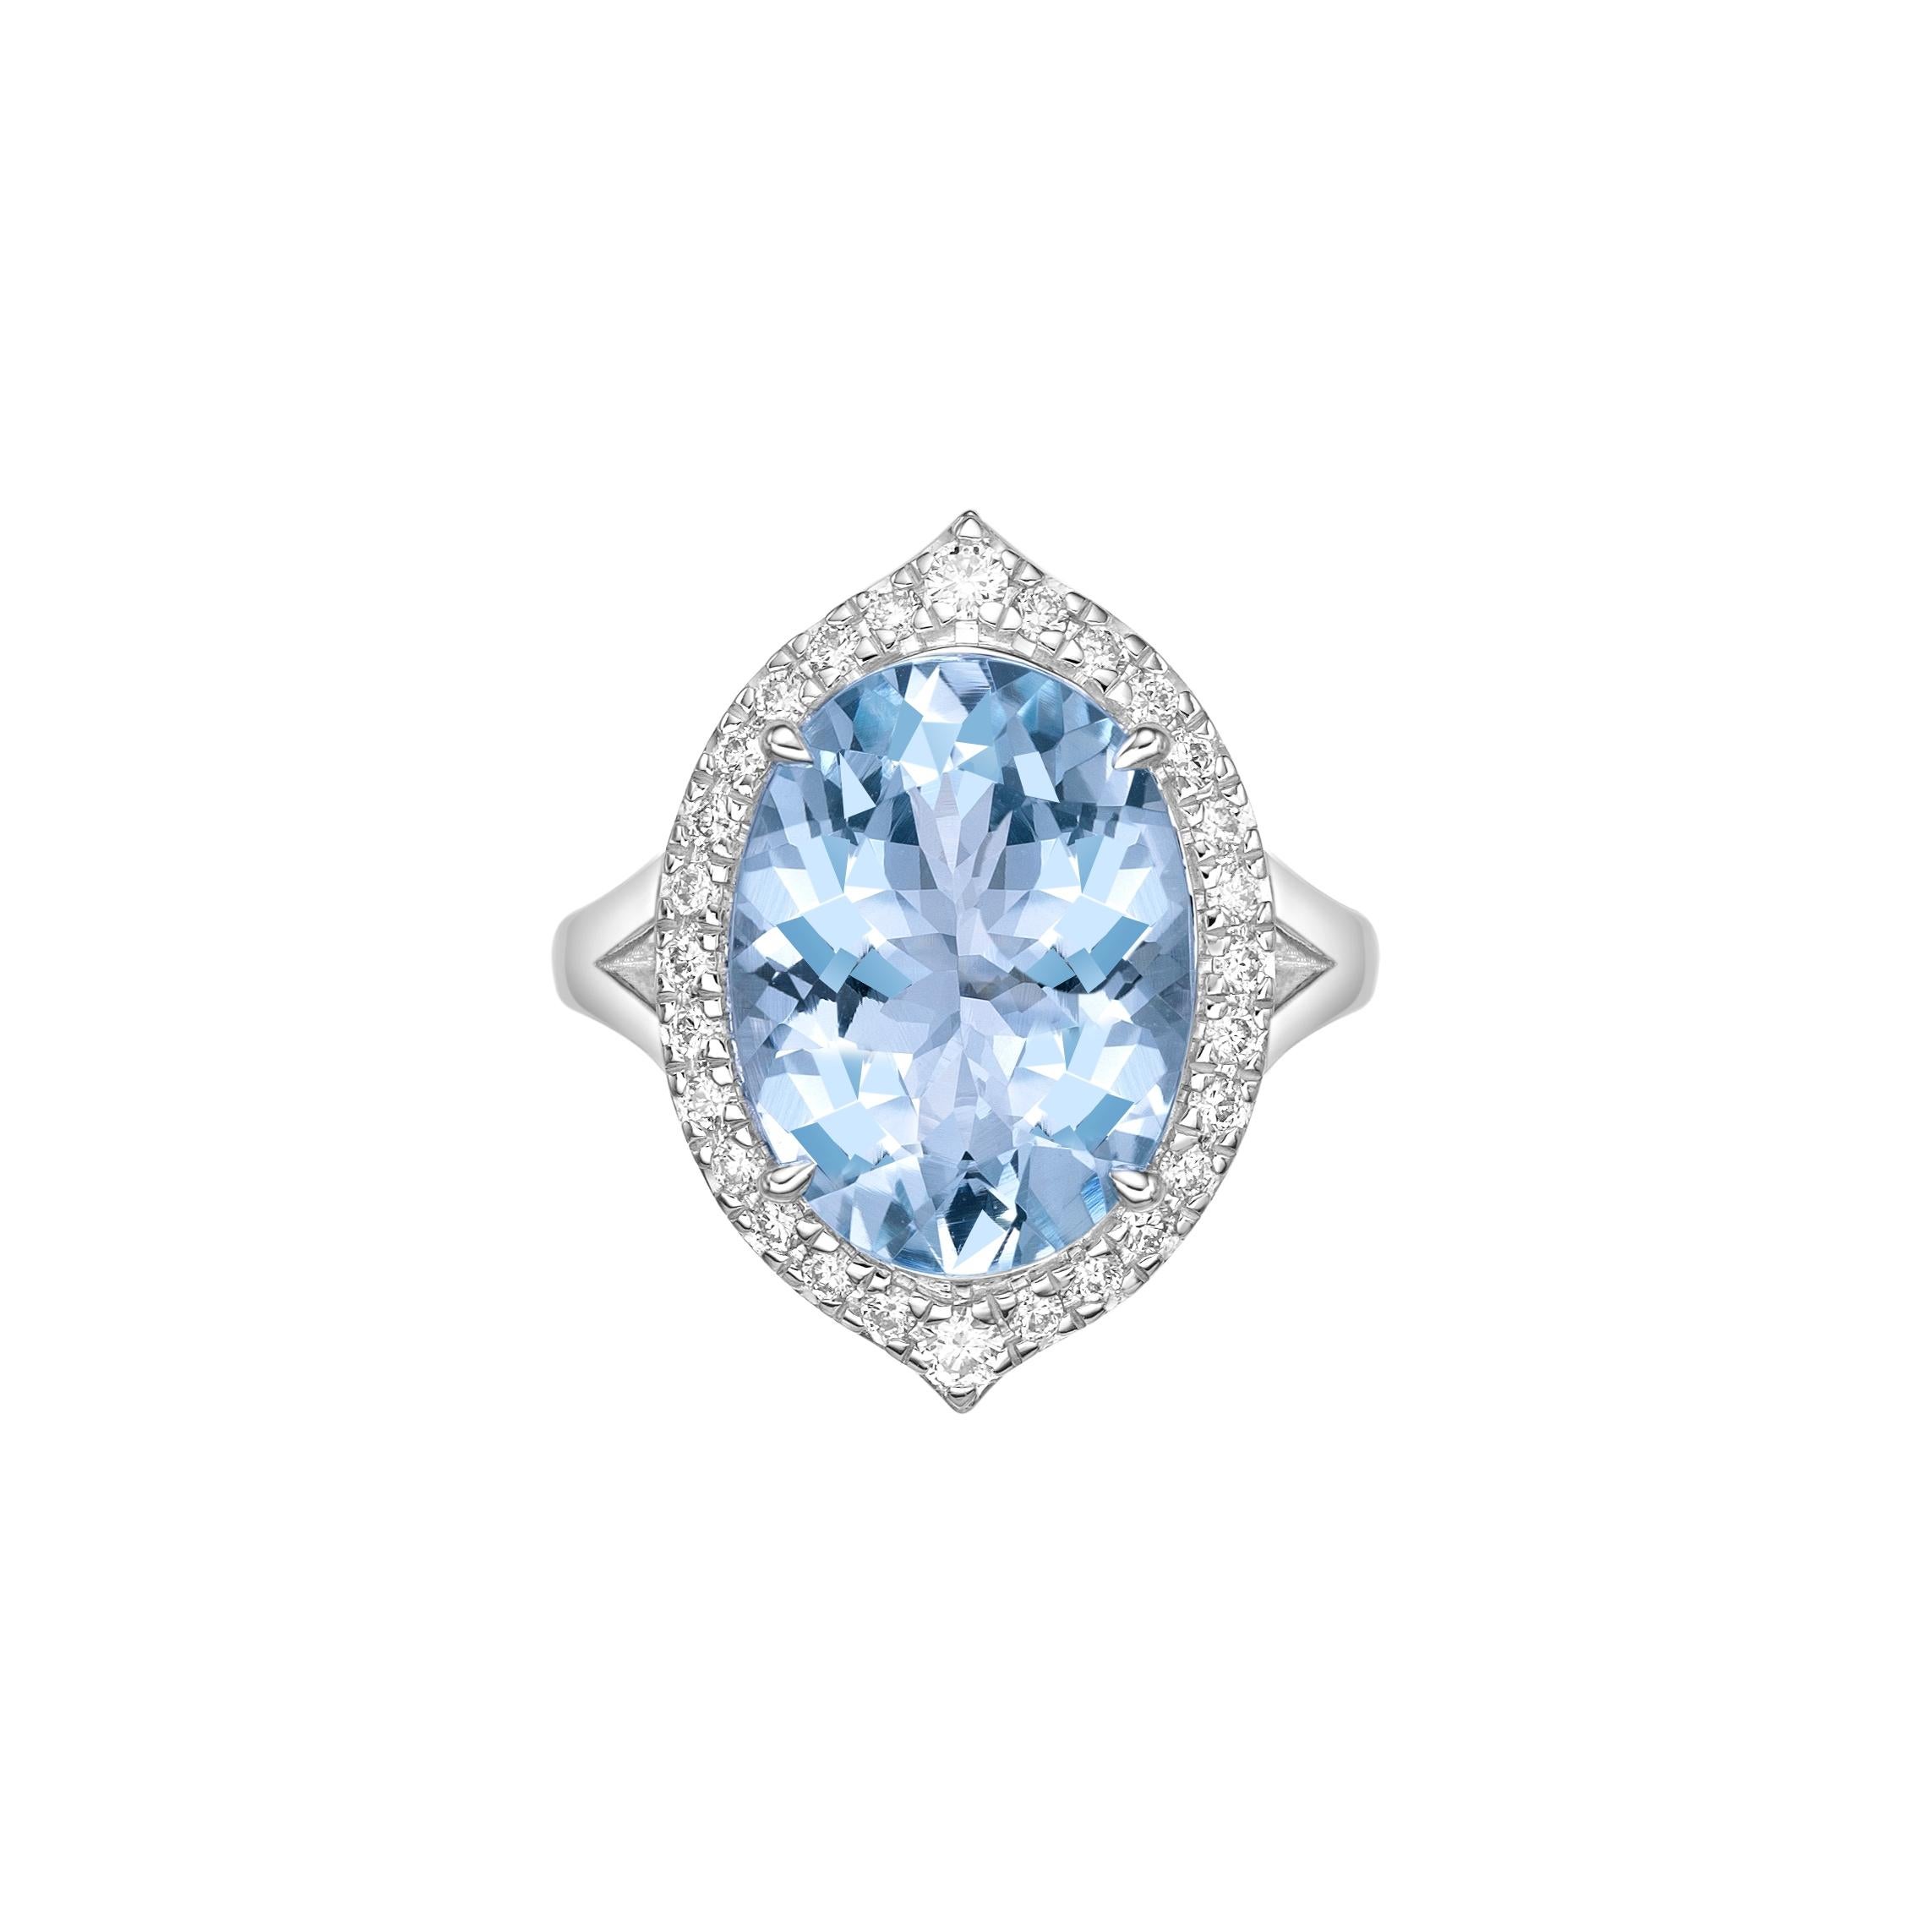 Contemporary 6.07Carat Aquamarine Fancy Ring in 18Karat White Gold with White Diamond. For Sale